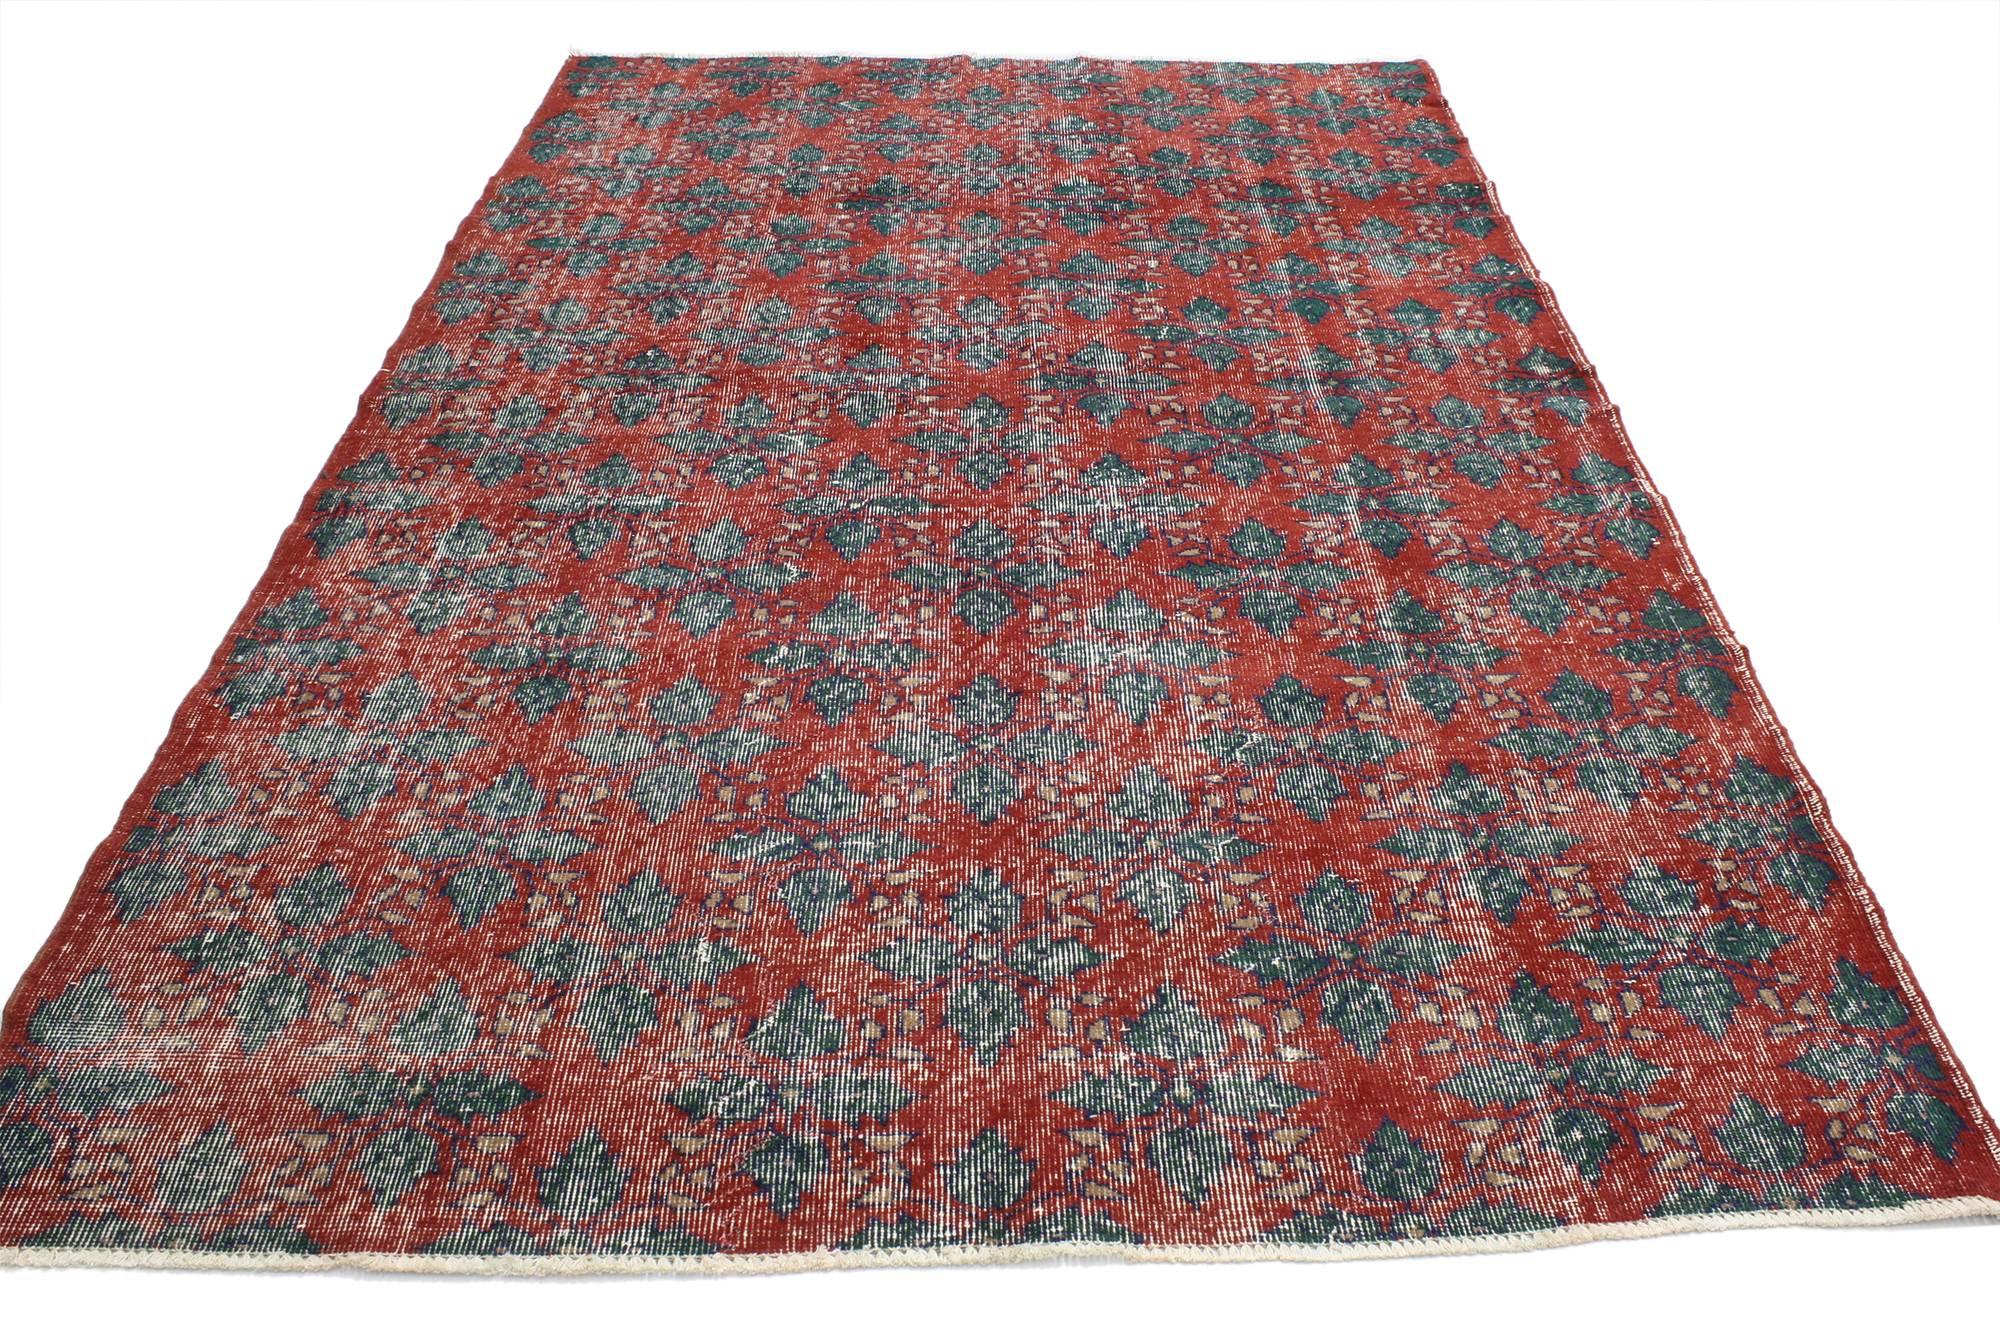 52030 Zeki Muren Distressed Vintage Turkish Sivas Rug with Industrial Art Deco Style 05'06 x 09'00. This distressed vintage Turkish Sivas rug with modern Industrial Art Deco style features an all-over geometric pattern composed of four-petal leaves